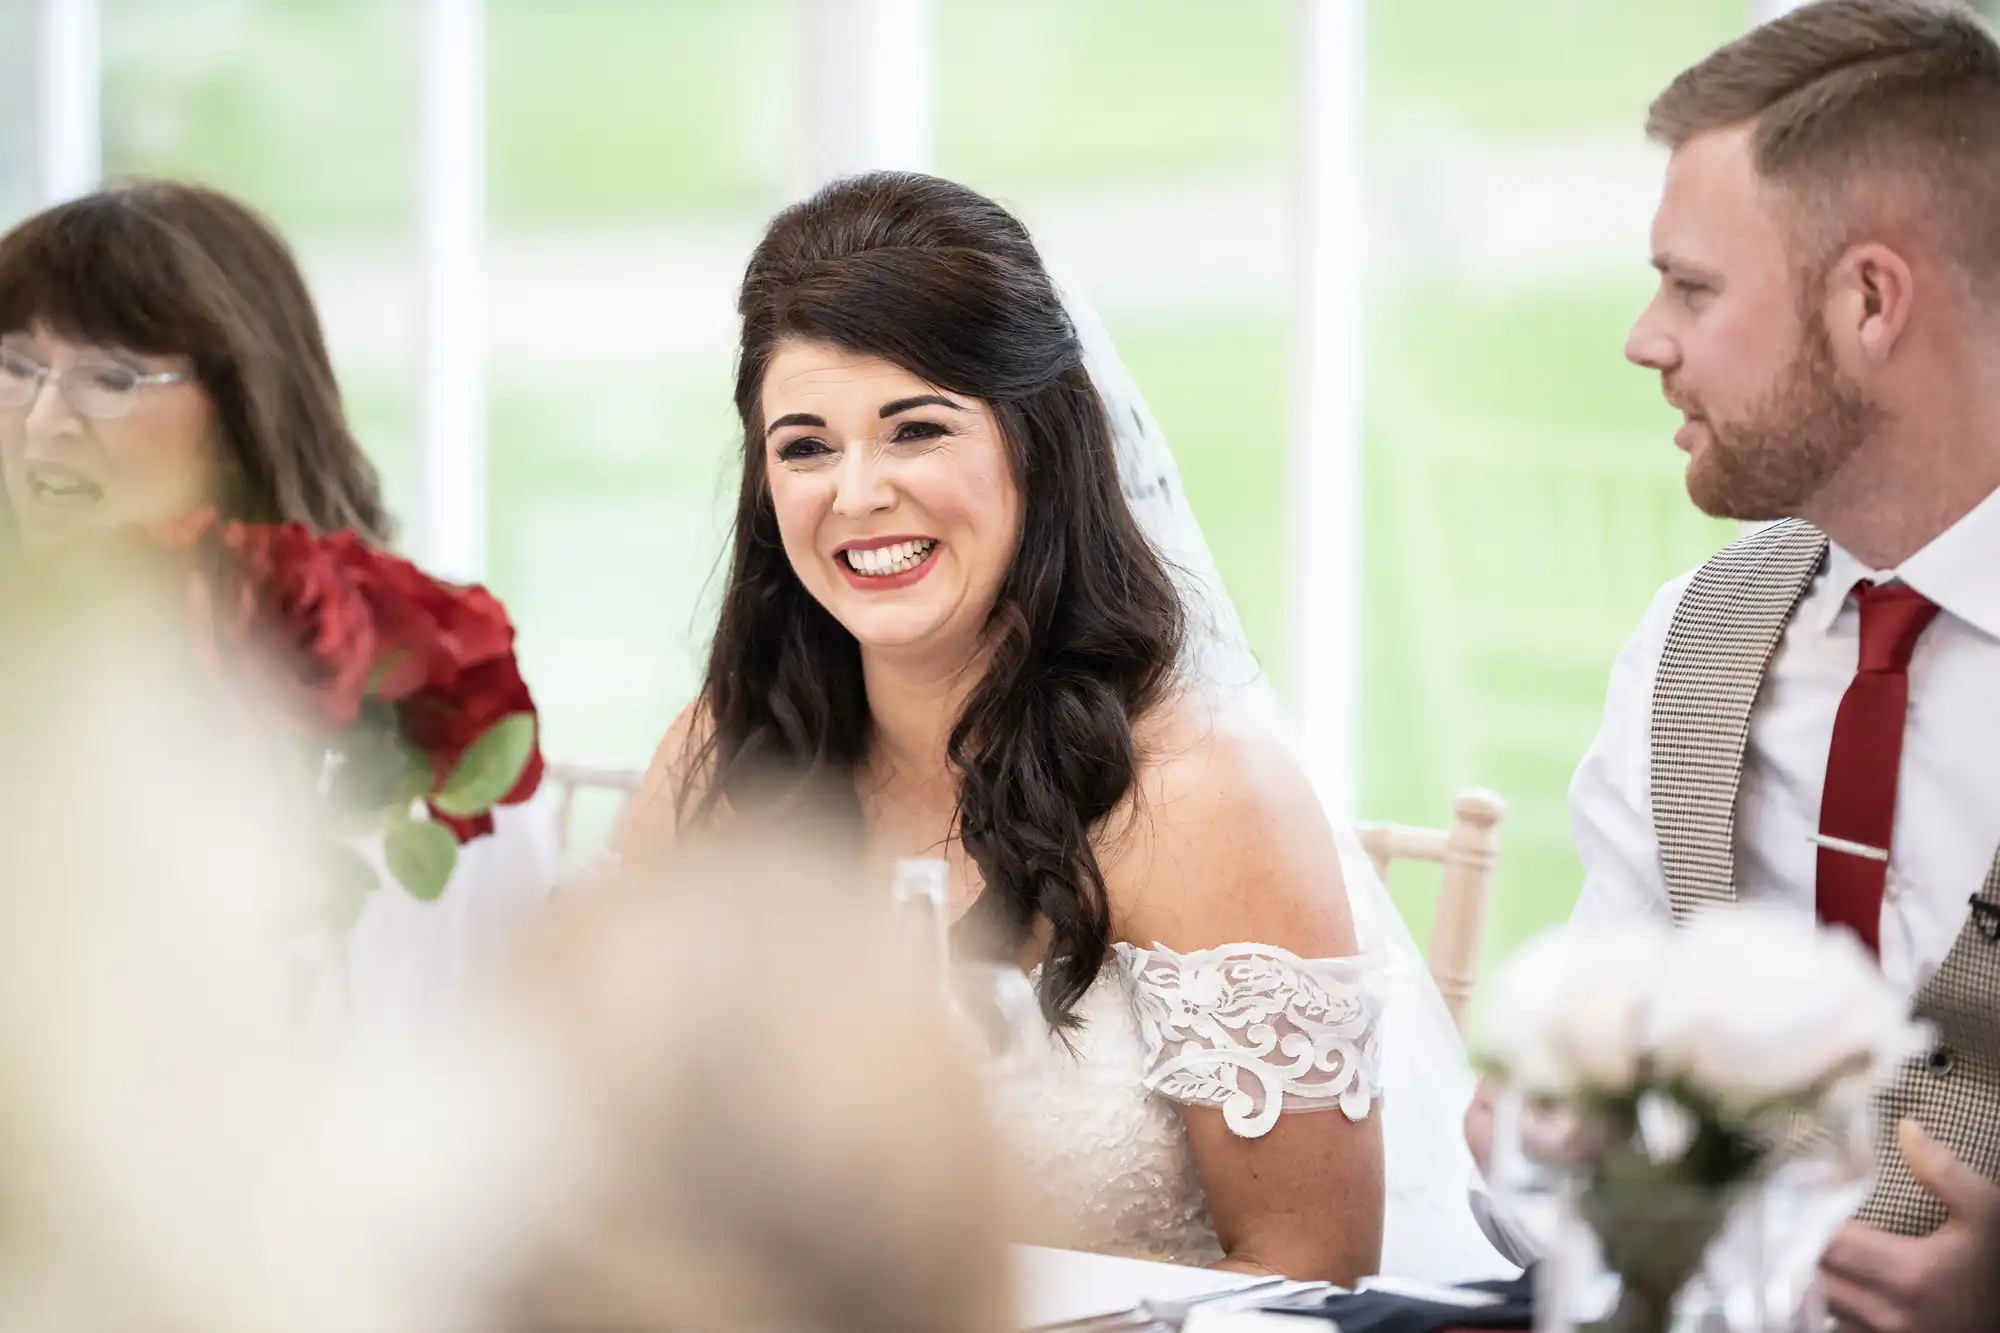 Bride in a white dress smiles while seated at a table between a man in a vest and tie and another woman, with bouquets of flowers in the foreground.